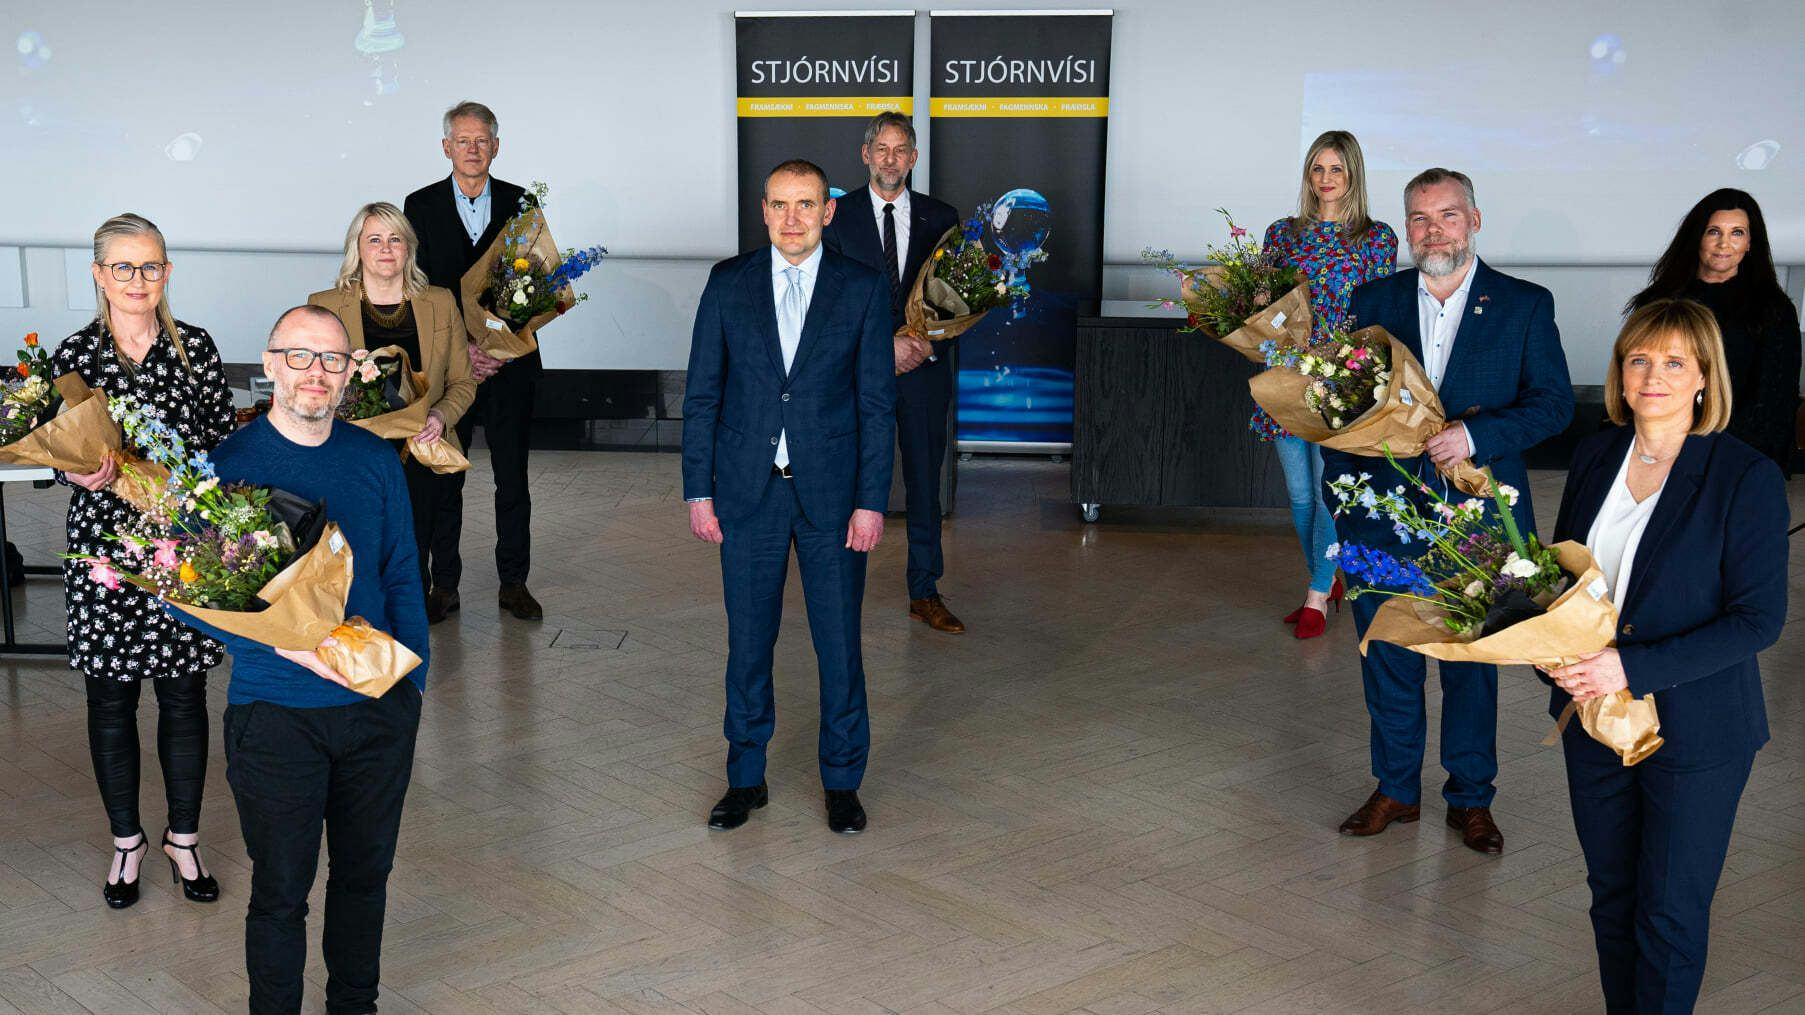 A group of ten individuals, each holding a bouquet of flowers, standing in a room with a backdrop that reads "Stjórnvísi"